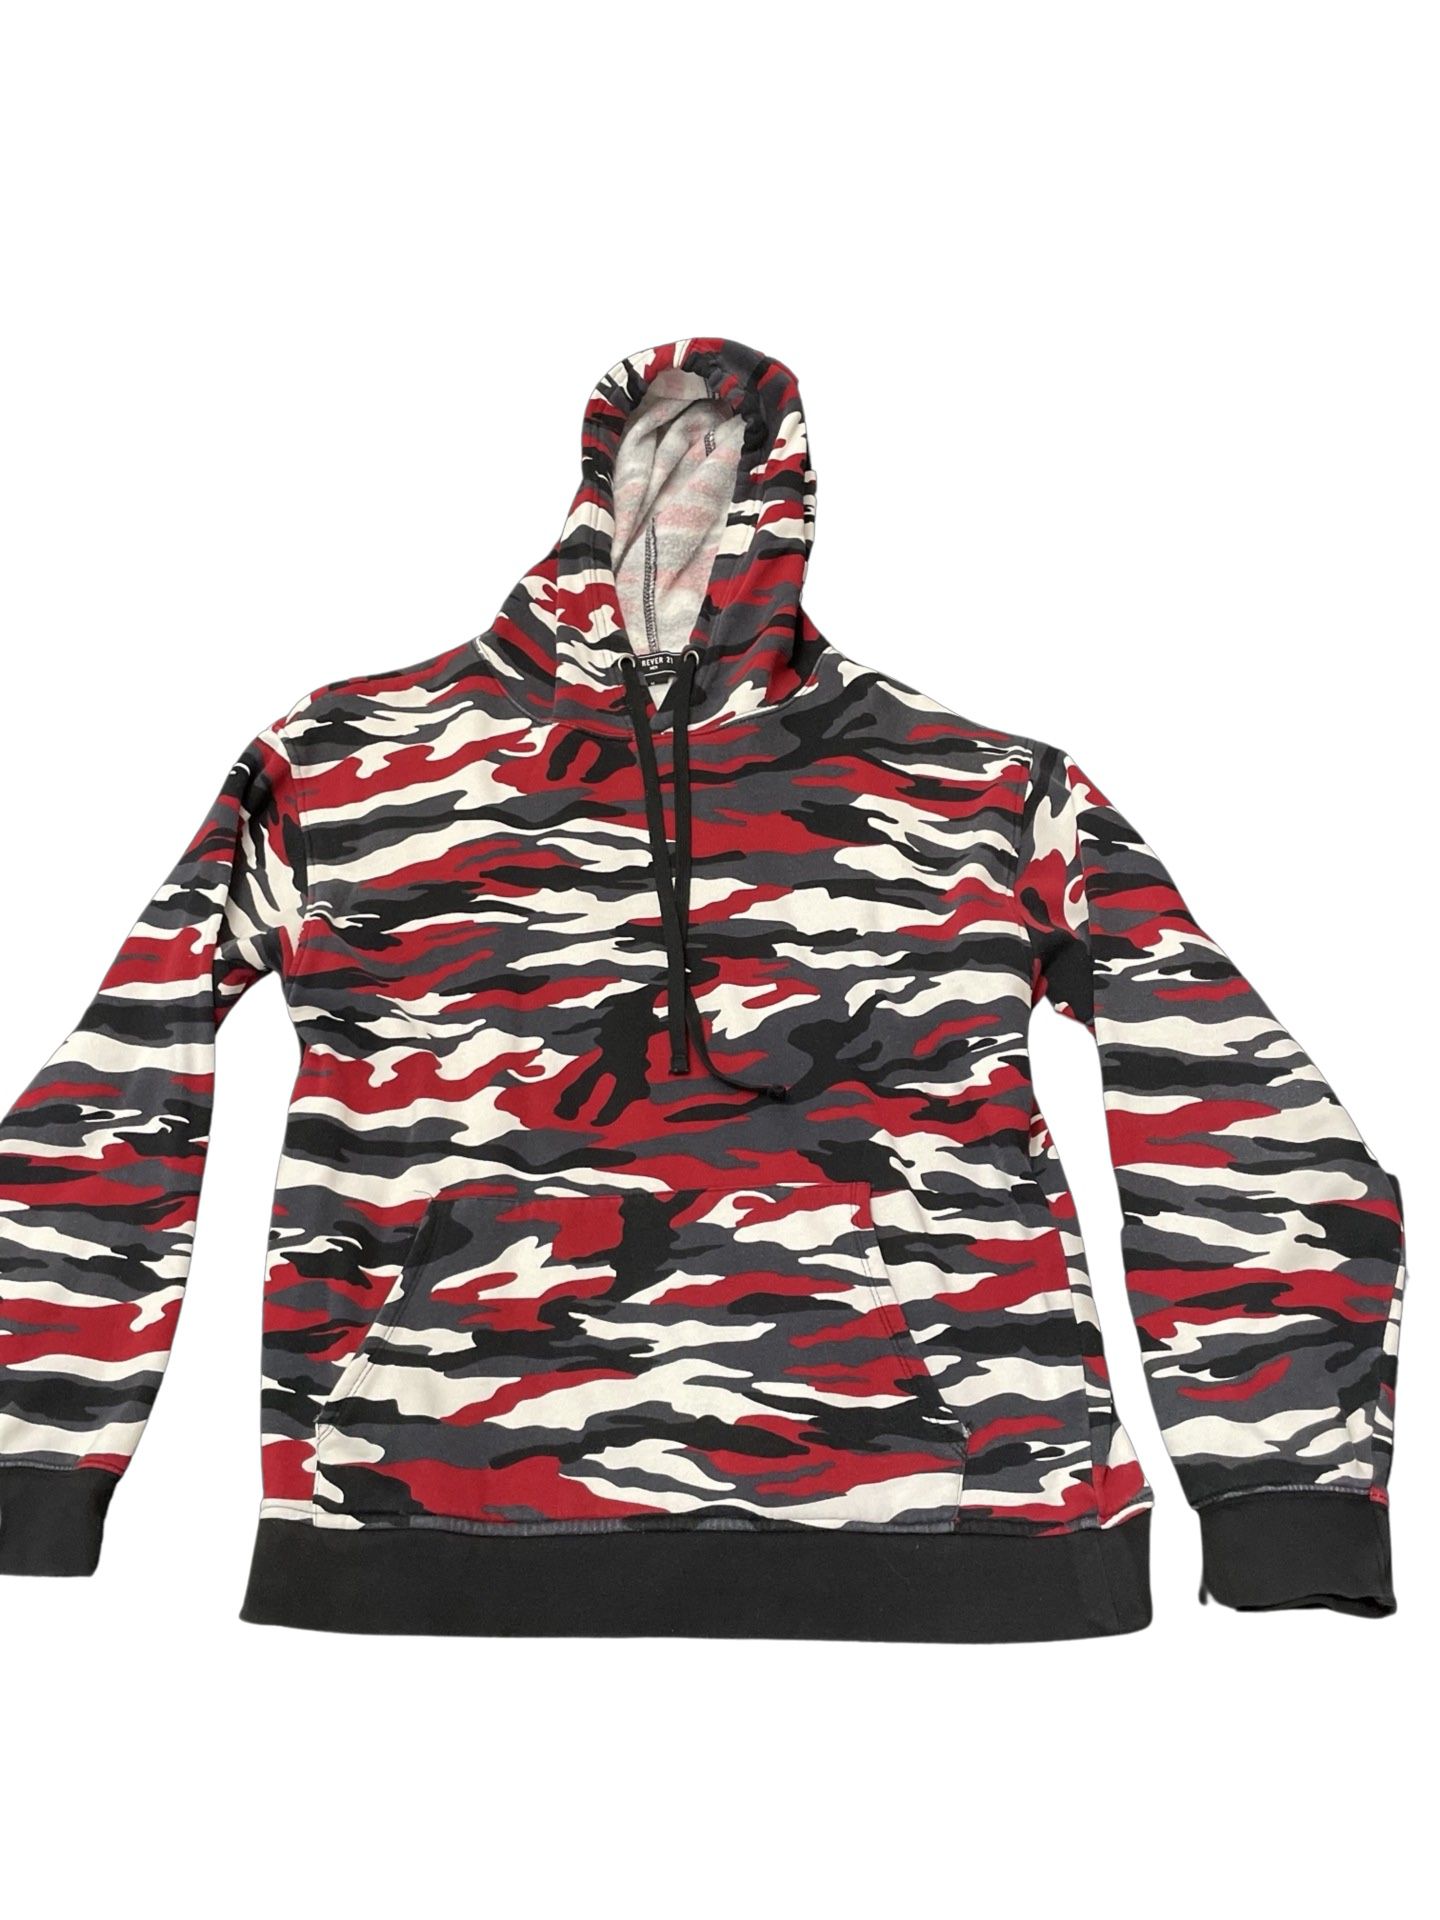  red camo jacket